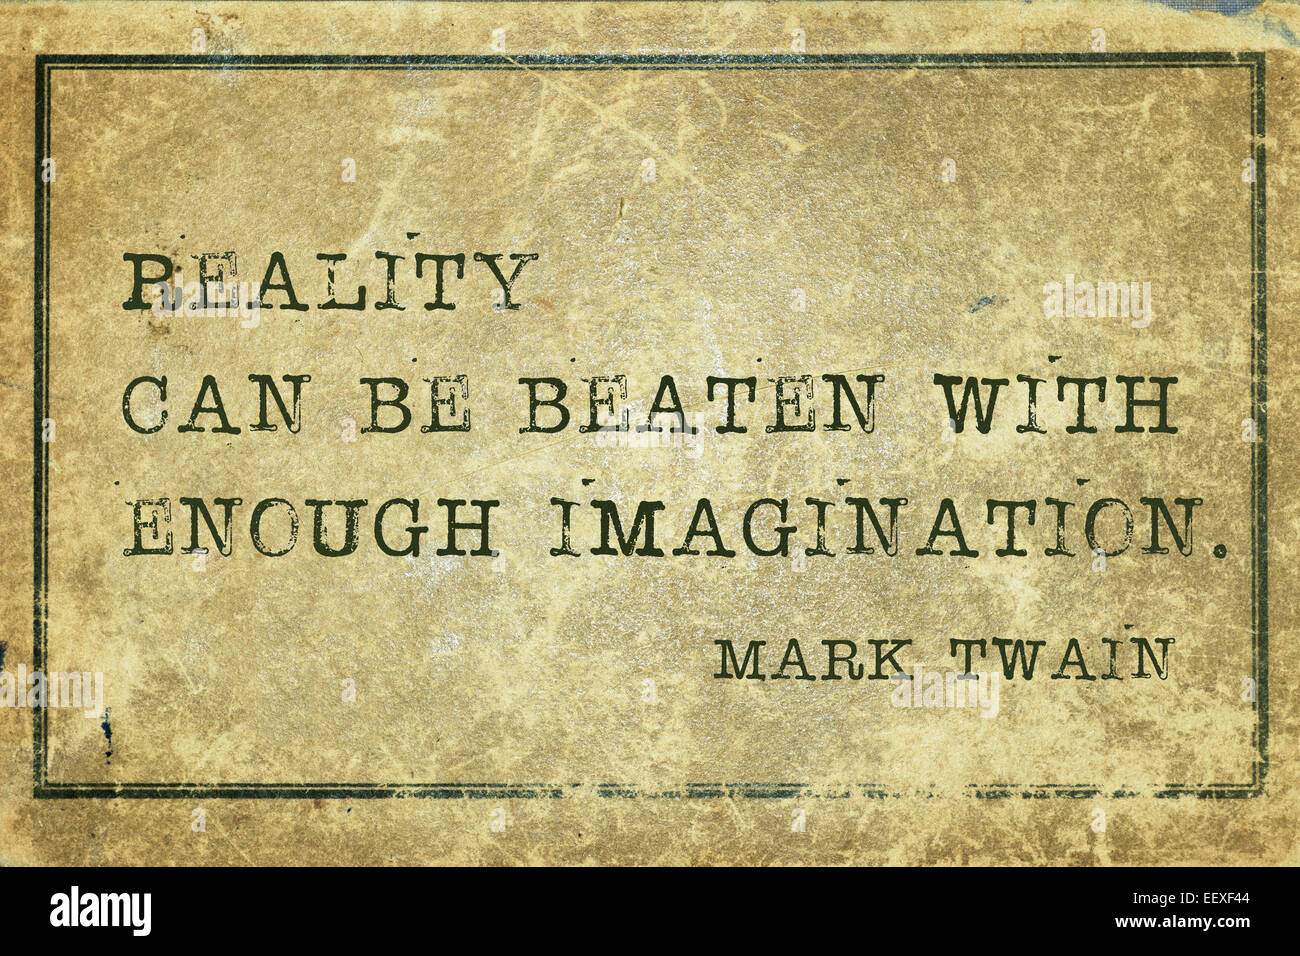 reality can be beaten with enough imagination - famous Mark Twain quote printed on grunge vintage cardboard Stock Photo